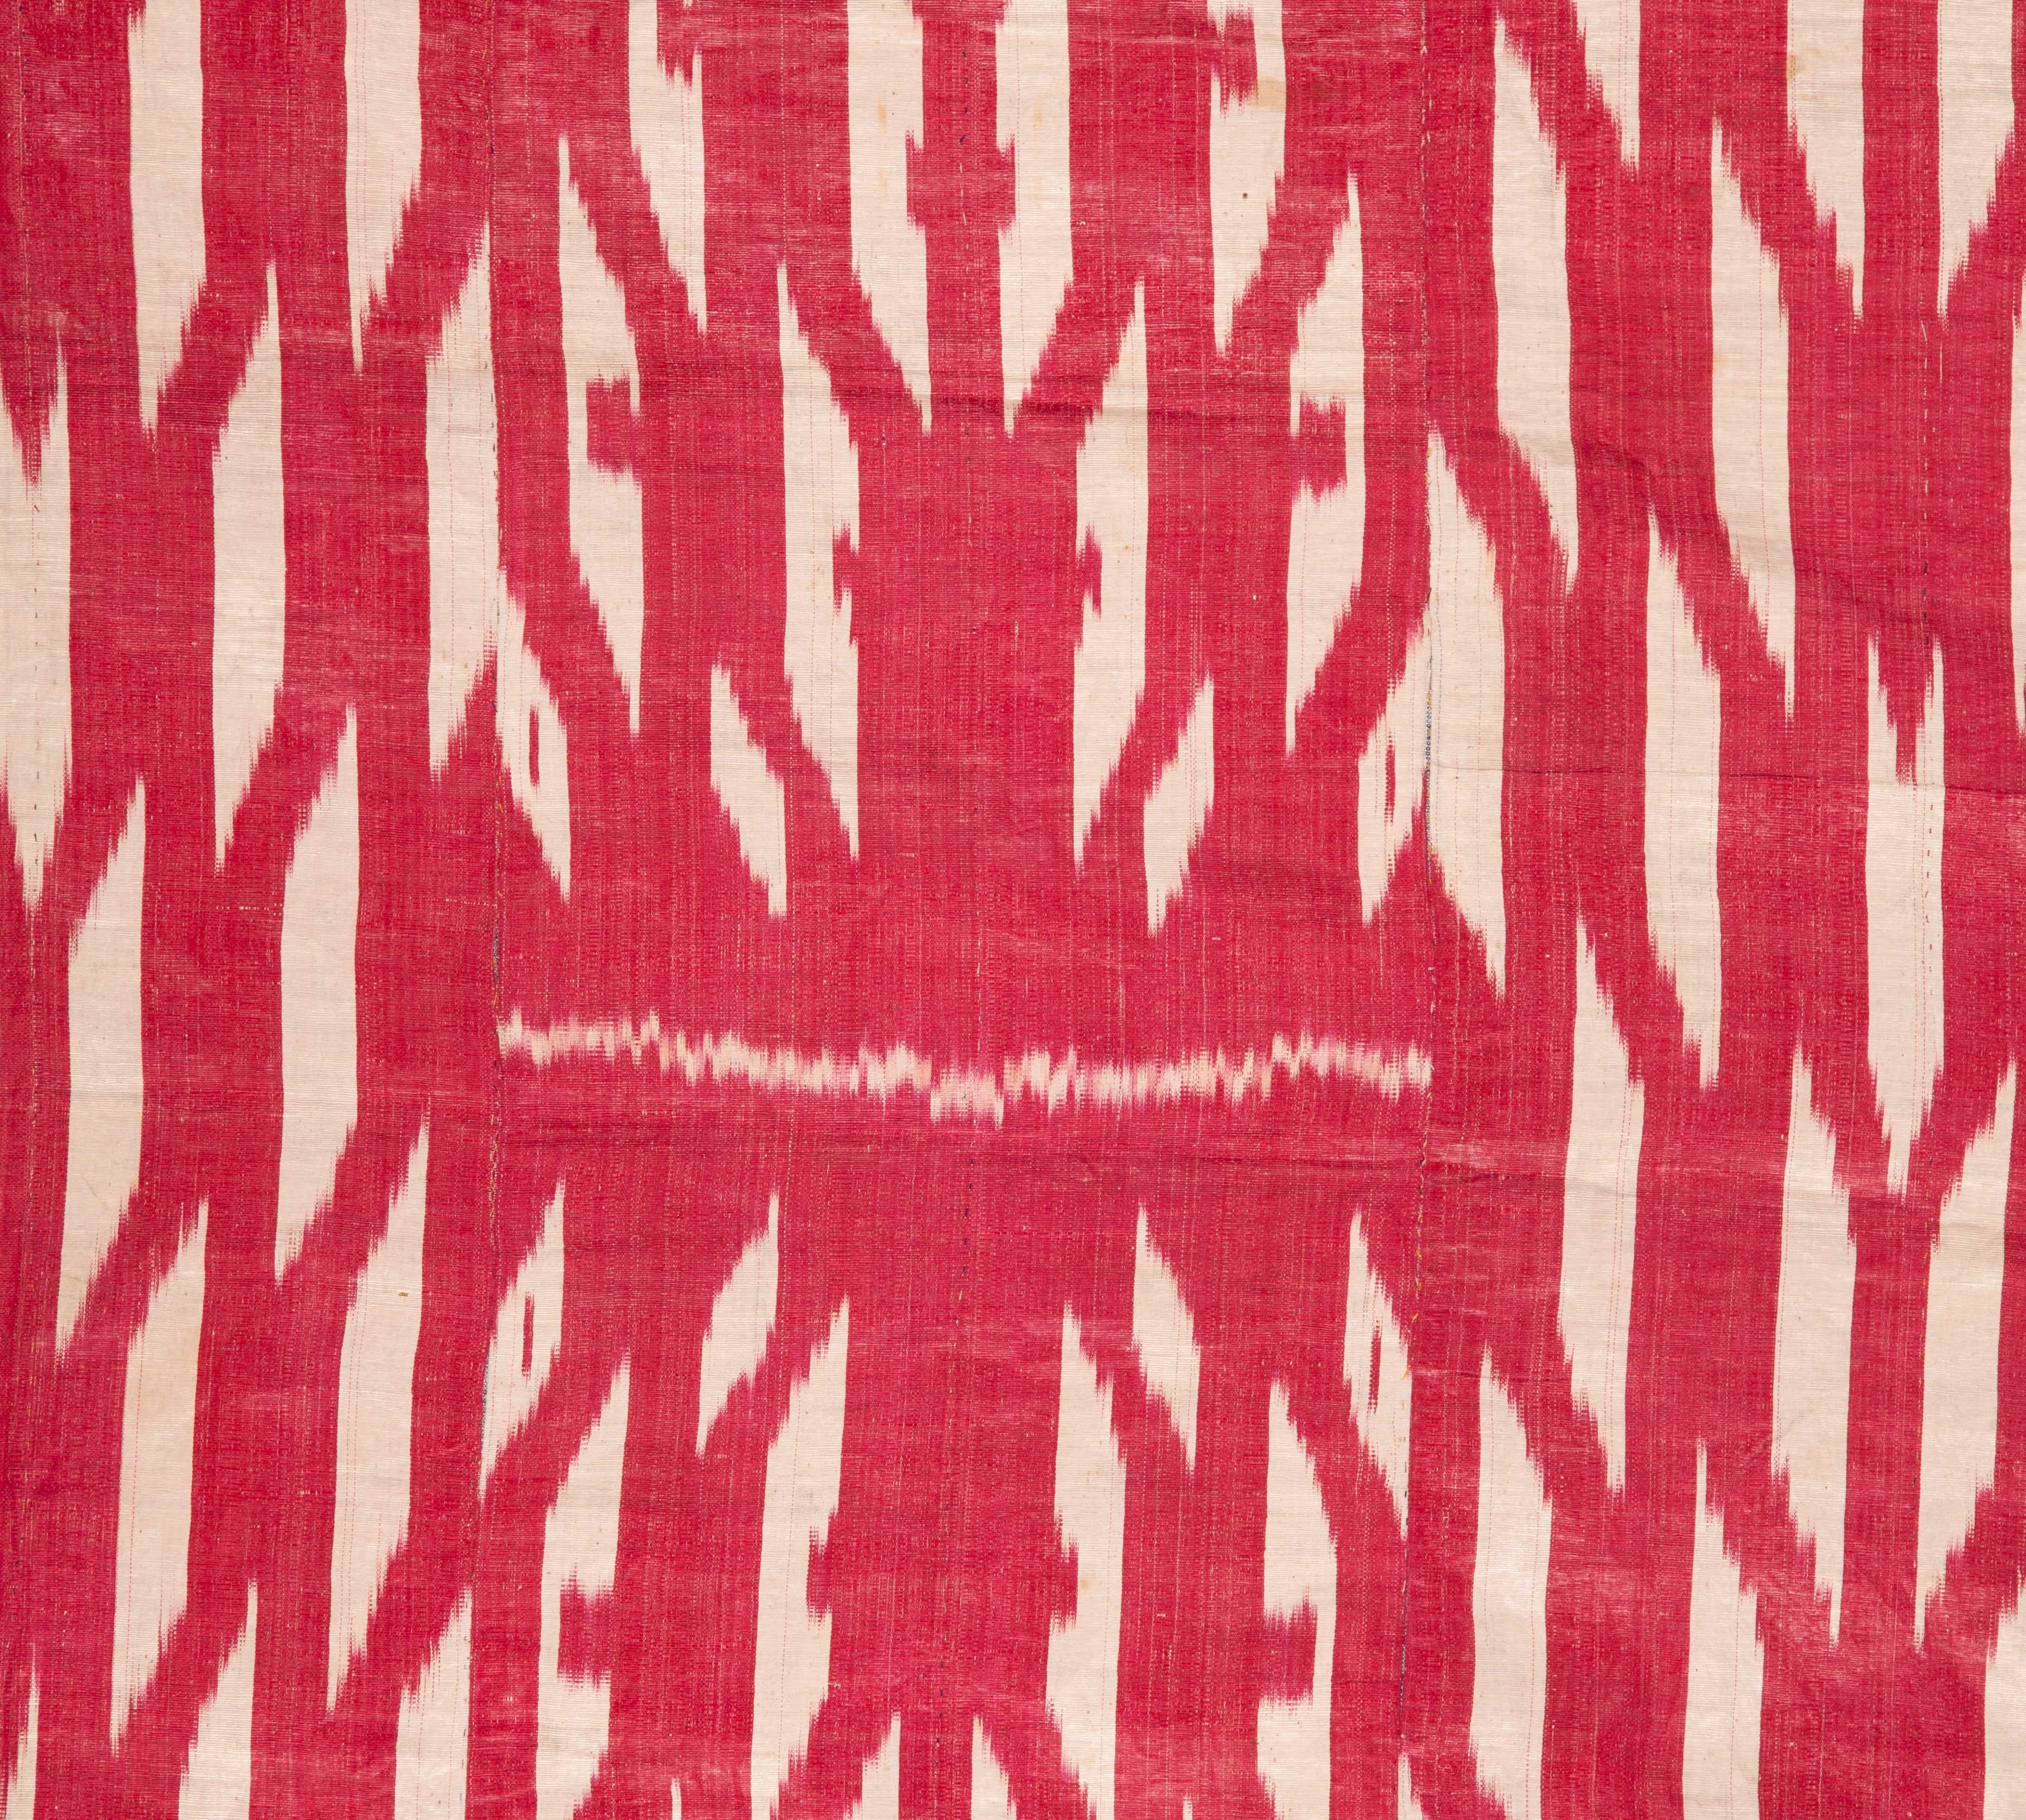 Islamic Antique Ikat Wall Hanging from Uzbekistan, Central Asia, 1870s-1880s